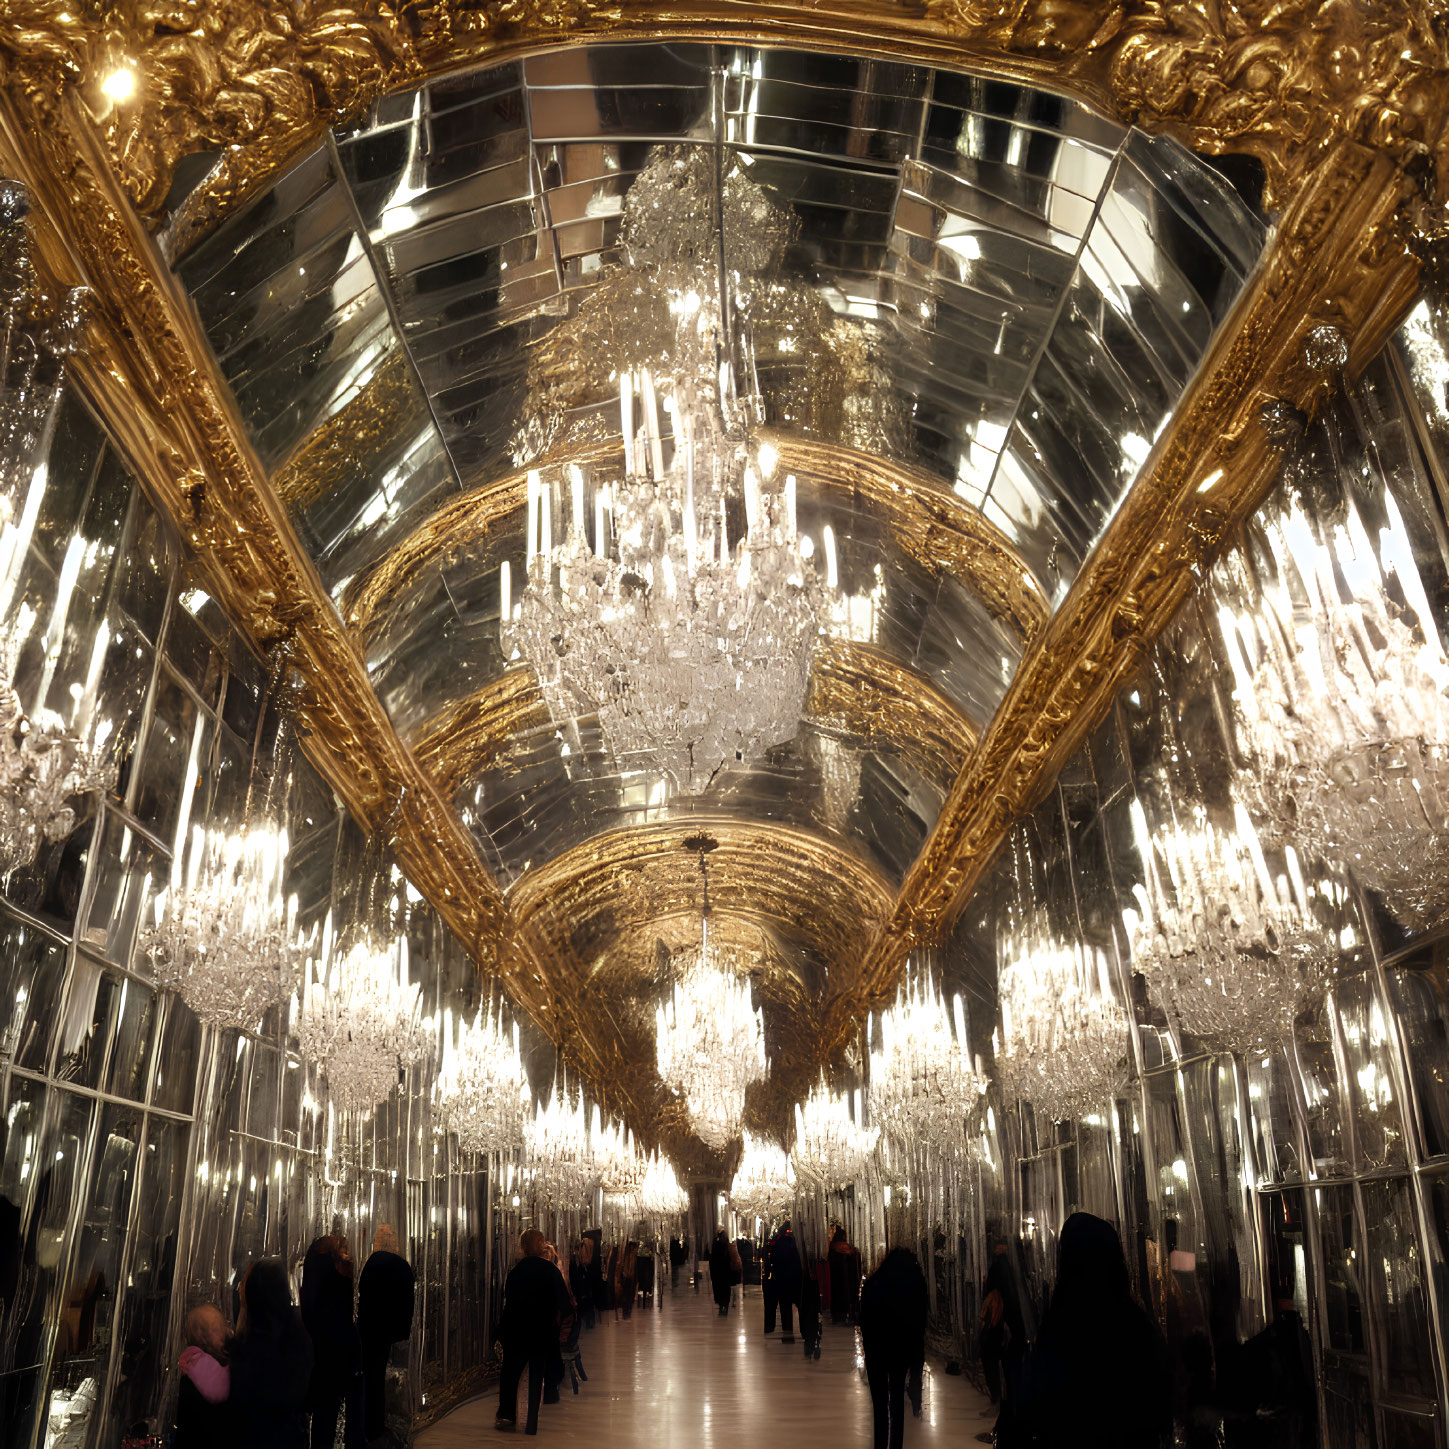 Luxurious Hall with Mirrored Walls and Crystal Chandeliers